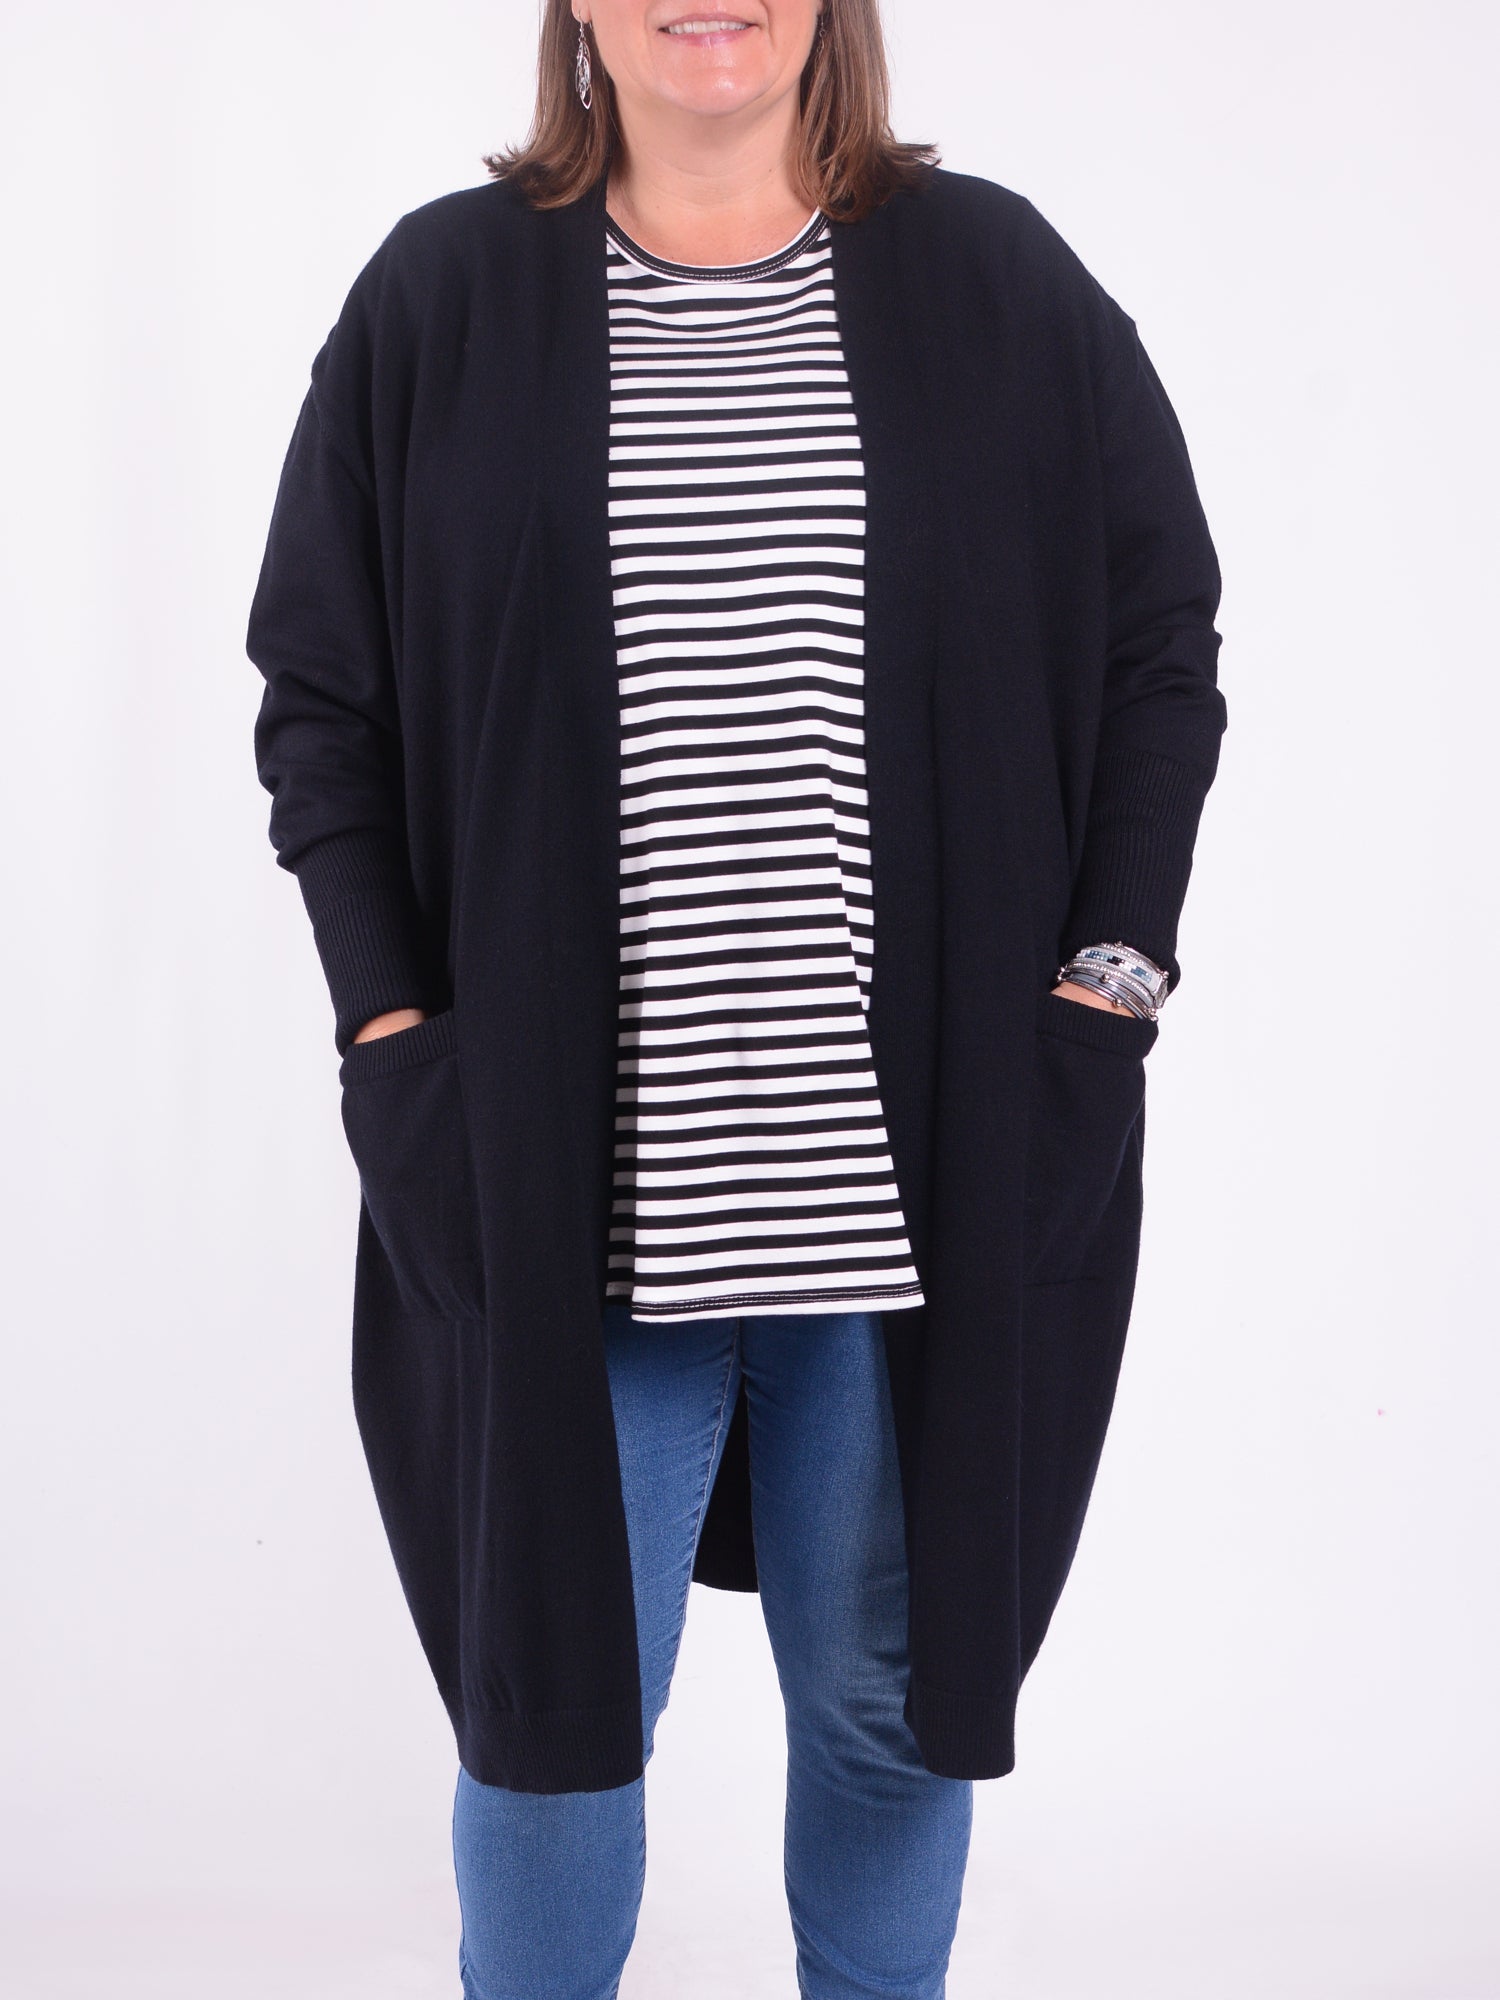 Soft Knit Longline Cardigan - CT1, Jumpers & Cardigans, Pure Plus Clothing, Lagenlook Clothing, Plus Size Fashion, Over 50 Fashion